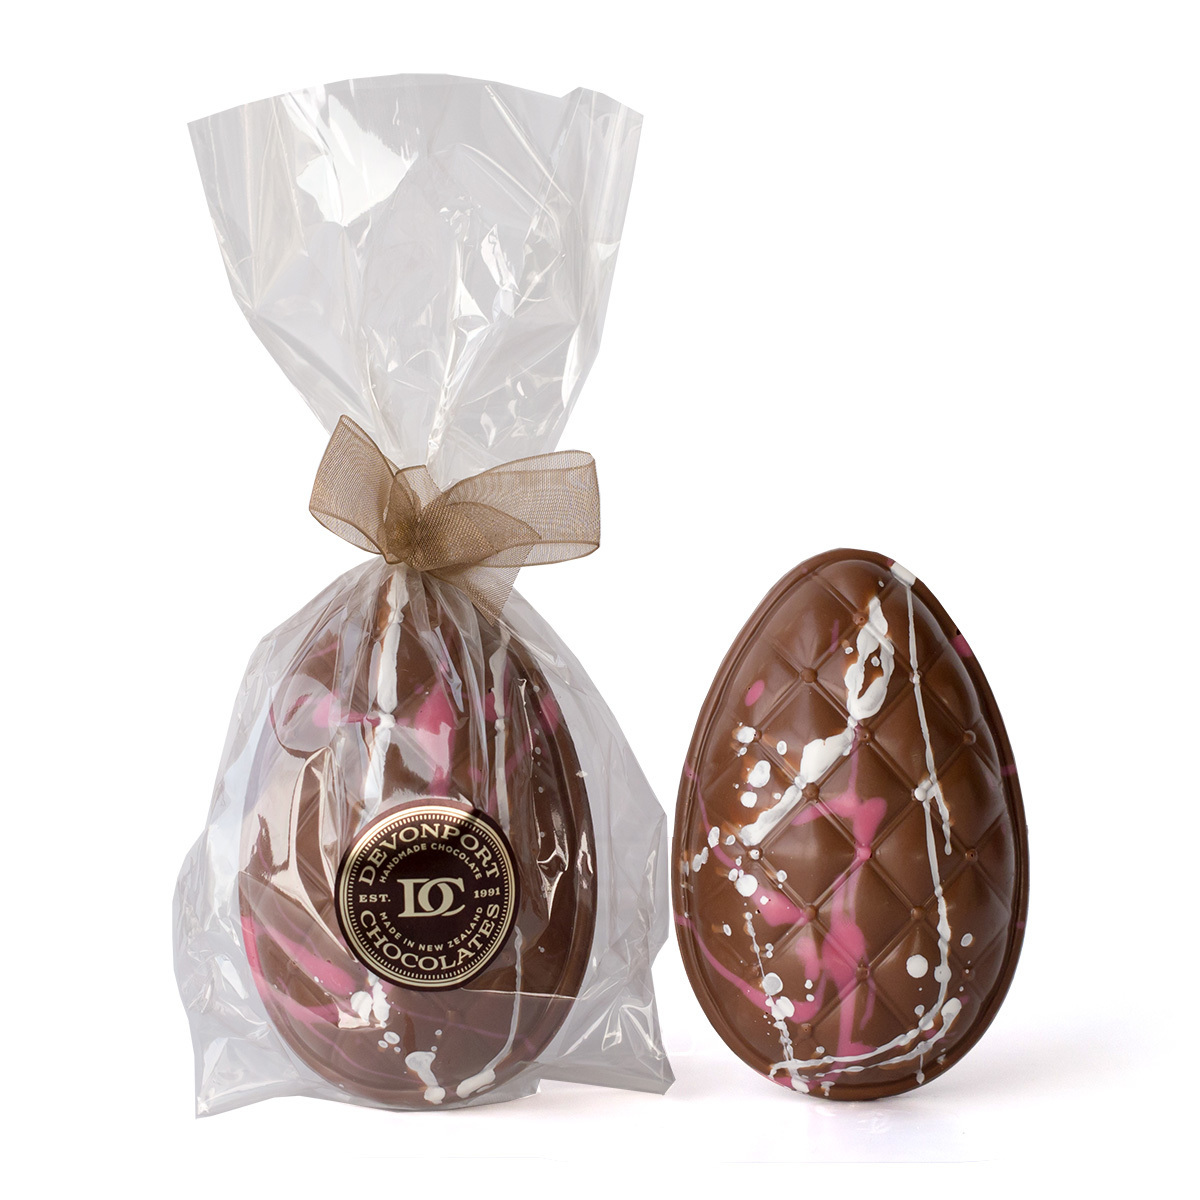 Chesterfield Egg Milk Chocolate - Out of stock